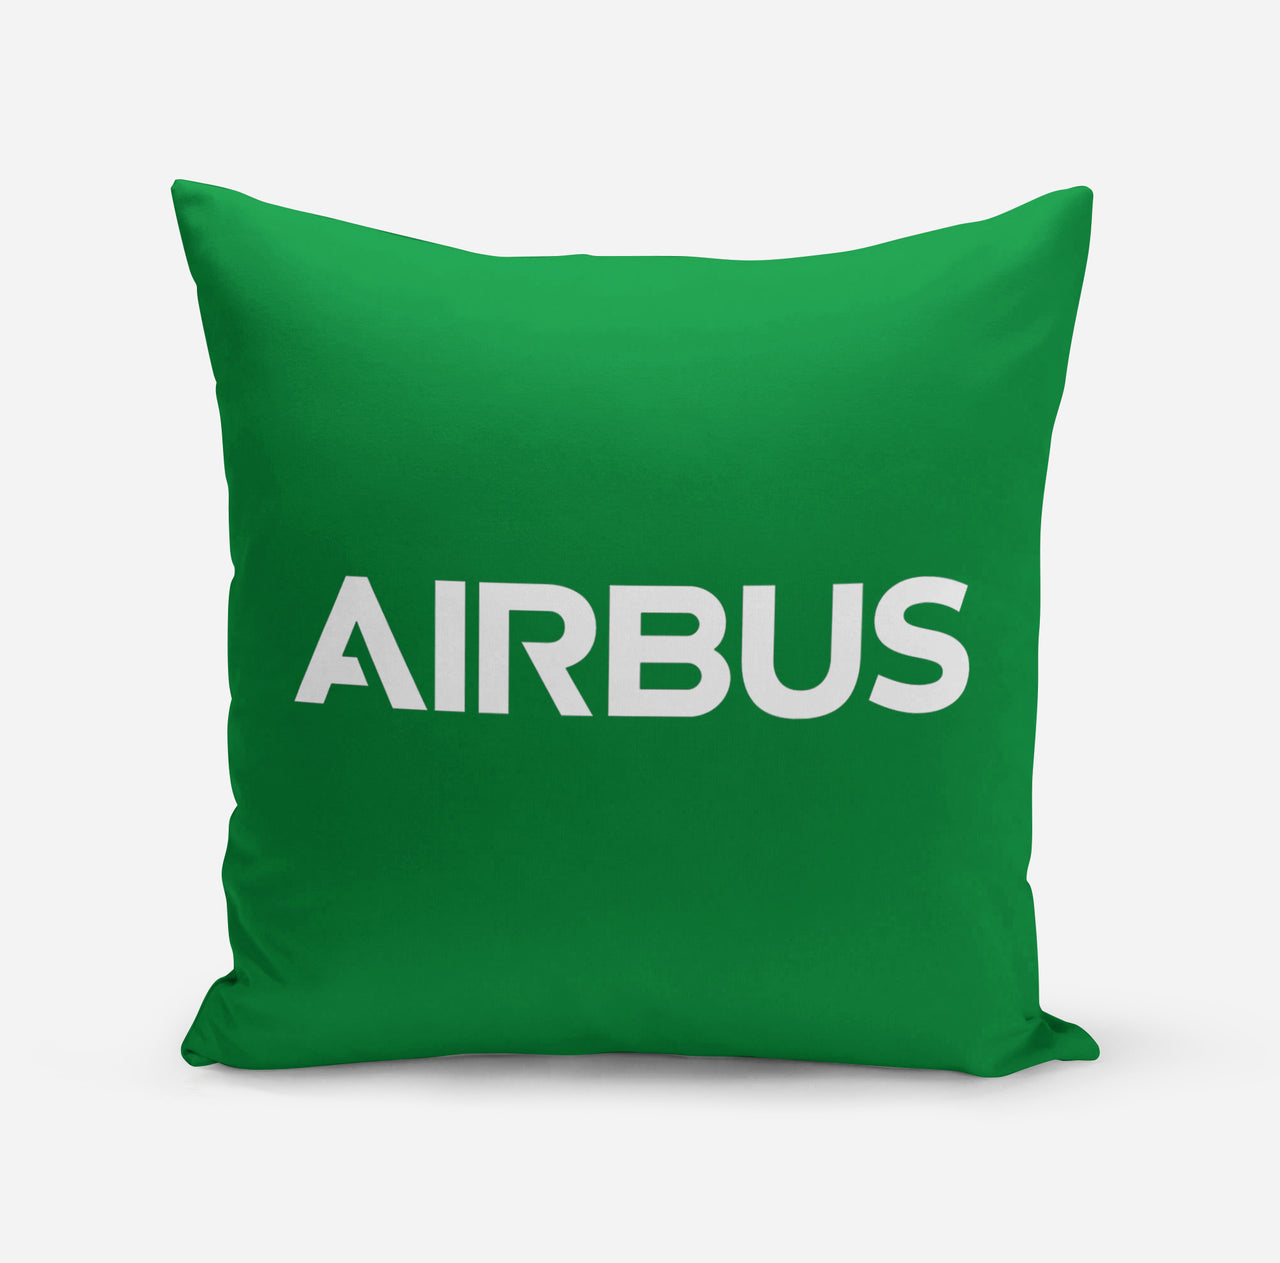 Airbus & Text Designed Pillows